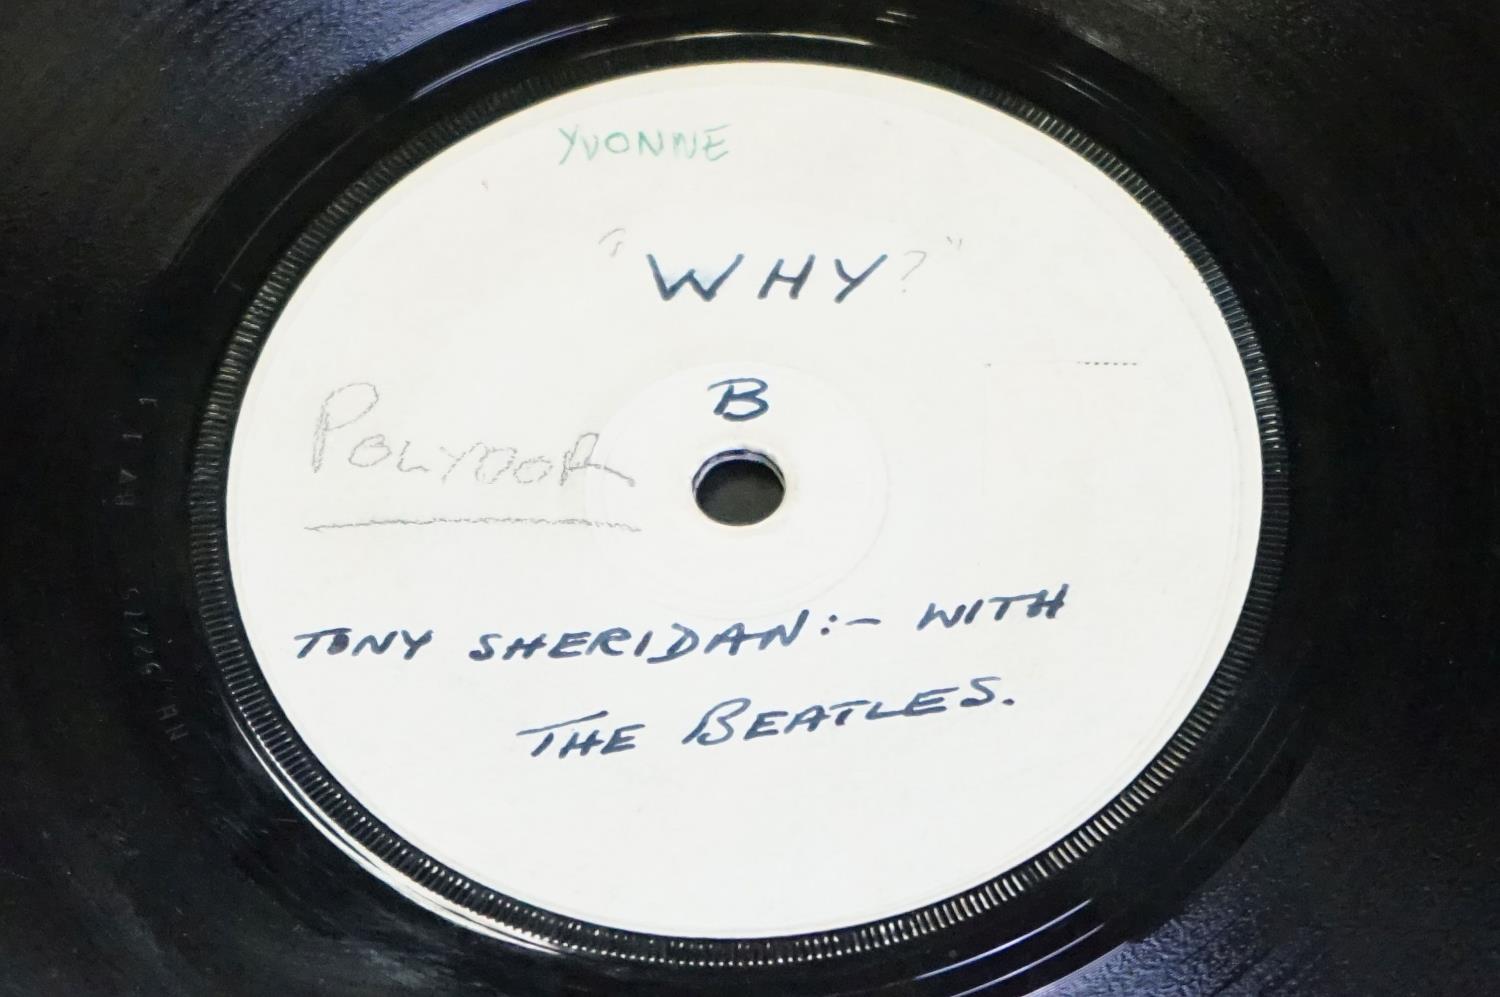 Vinyl - The Beatles - Cry For A Shadow / Tony Sheridan & The Beatles - Why? 1964 original UK Polydor - Image 4 of 6